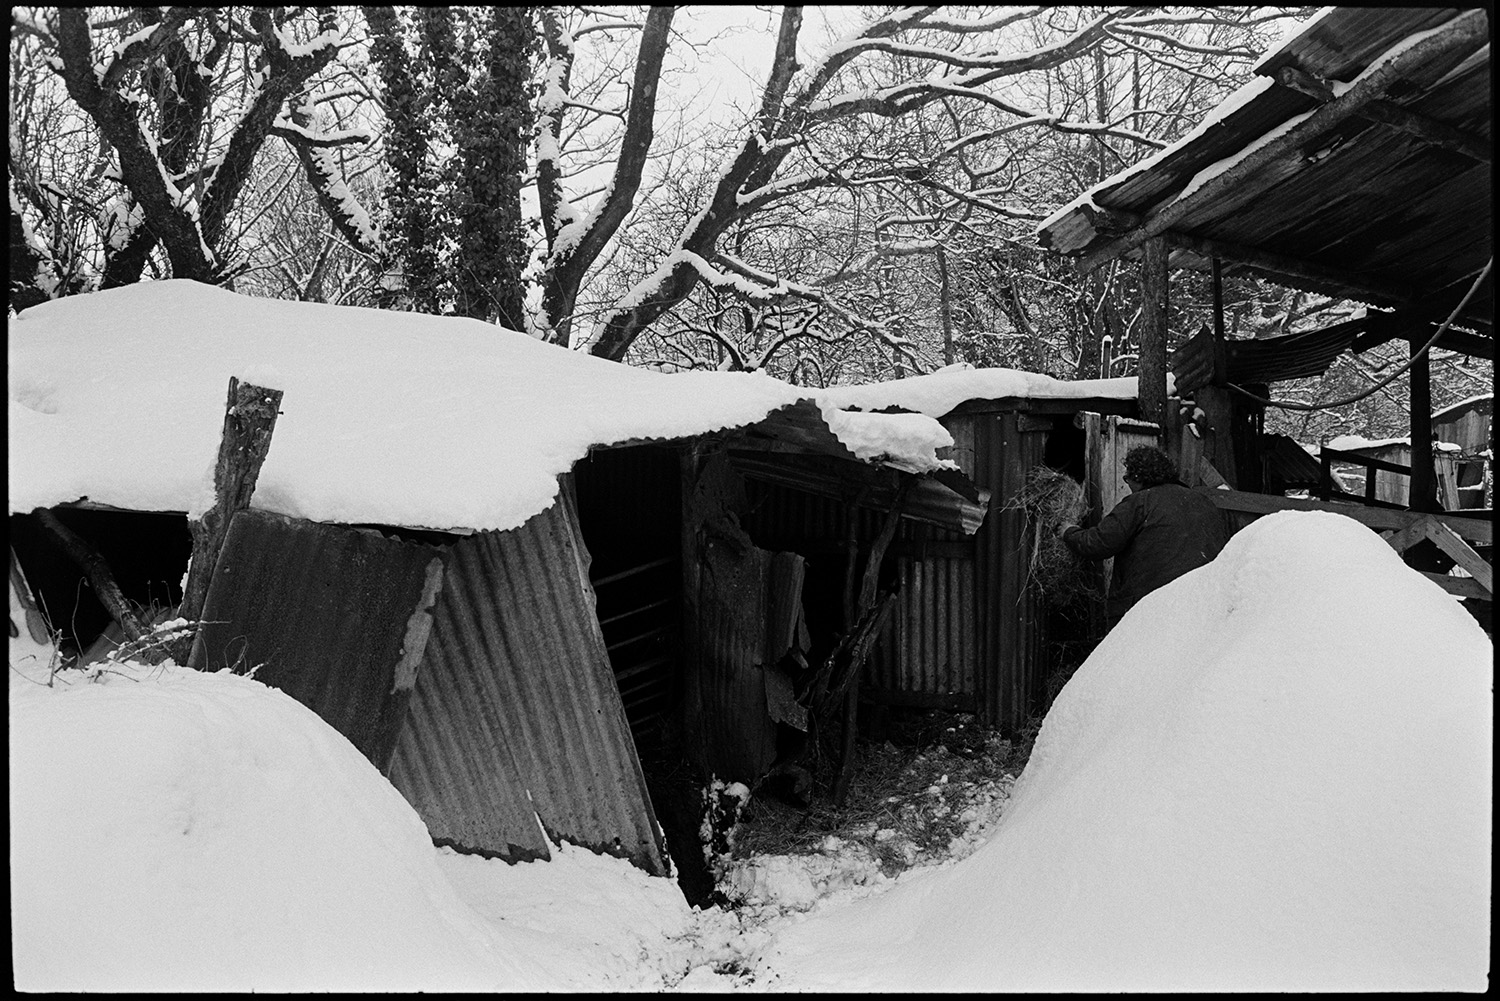 Snow, farmyard poultry, goats and dogs. Tractor and collapsing corrugated iron sheds.
[Snow covered, collapsing corrugated iron sheds in the farmyard at Cuppers Piece, Beaford. Olive Bennett is taking hay into one of the sheds and snow covered trees are visible in the background.]